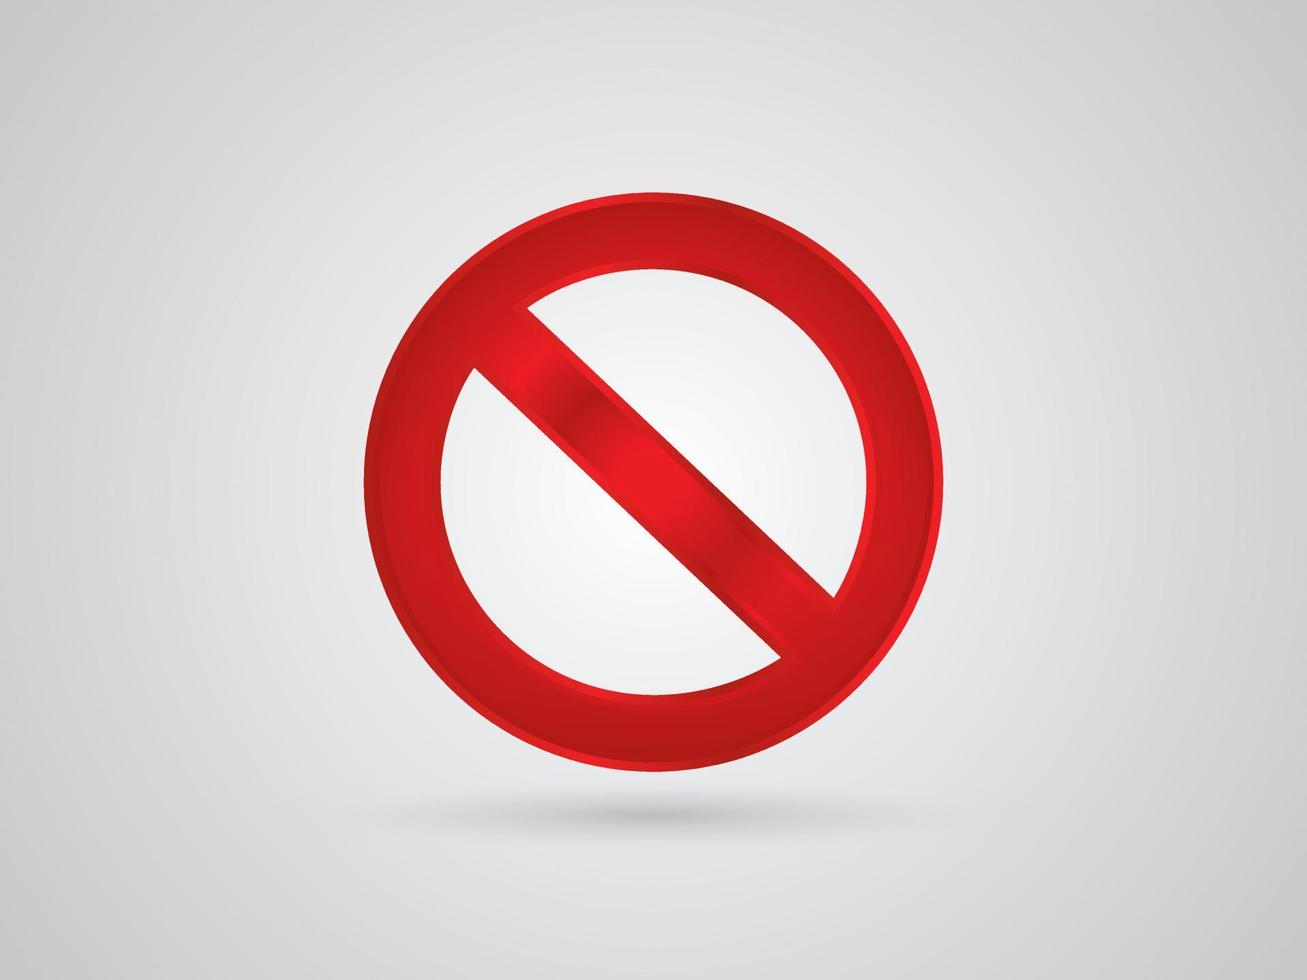 Prohibiting sign. Do not enter a road sign with a red crossed circle. prohibition sign icon flat design style. No Sign Vector, vector